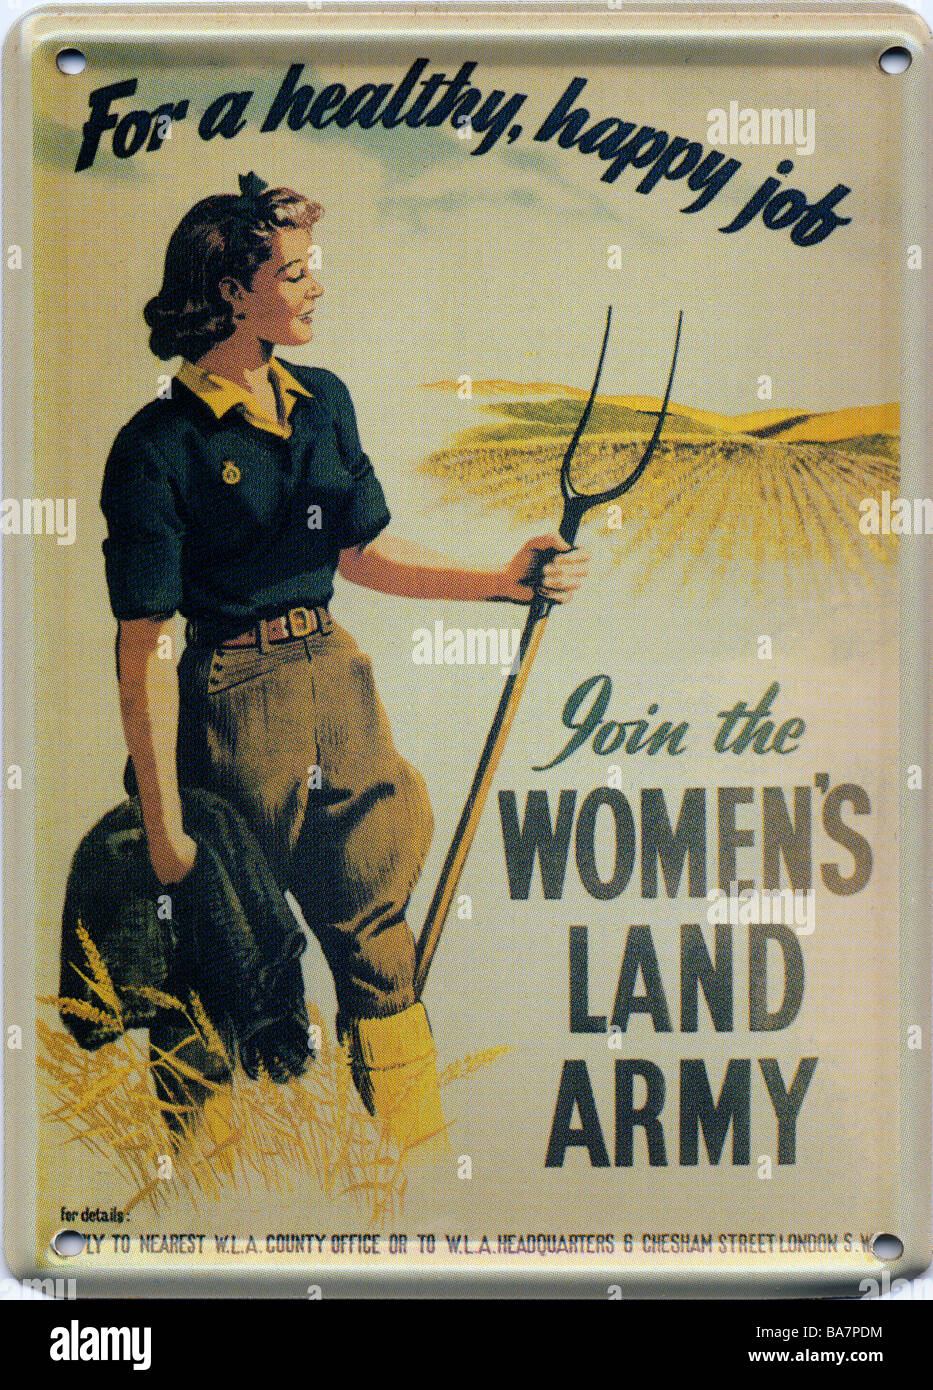 happy job join the Women's Land Army Vintage Recruiting Poster For a healthy 